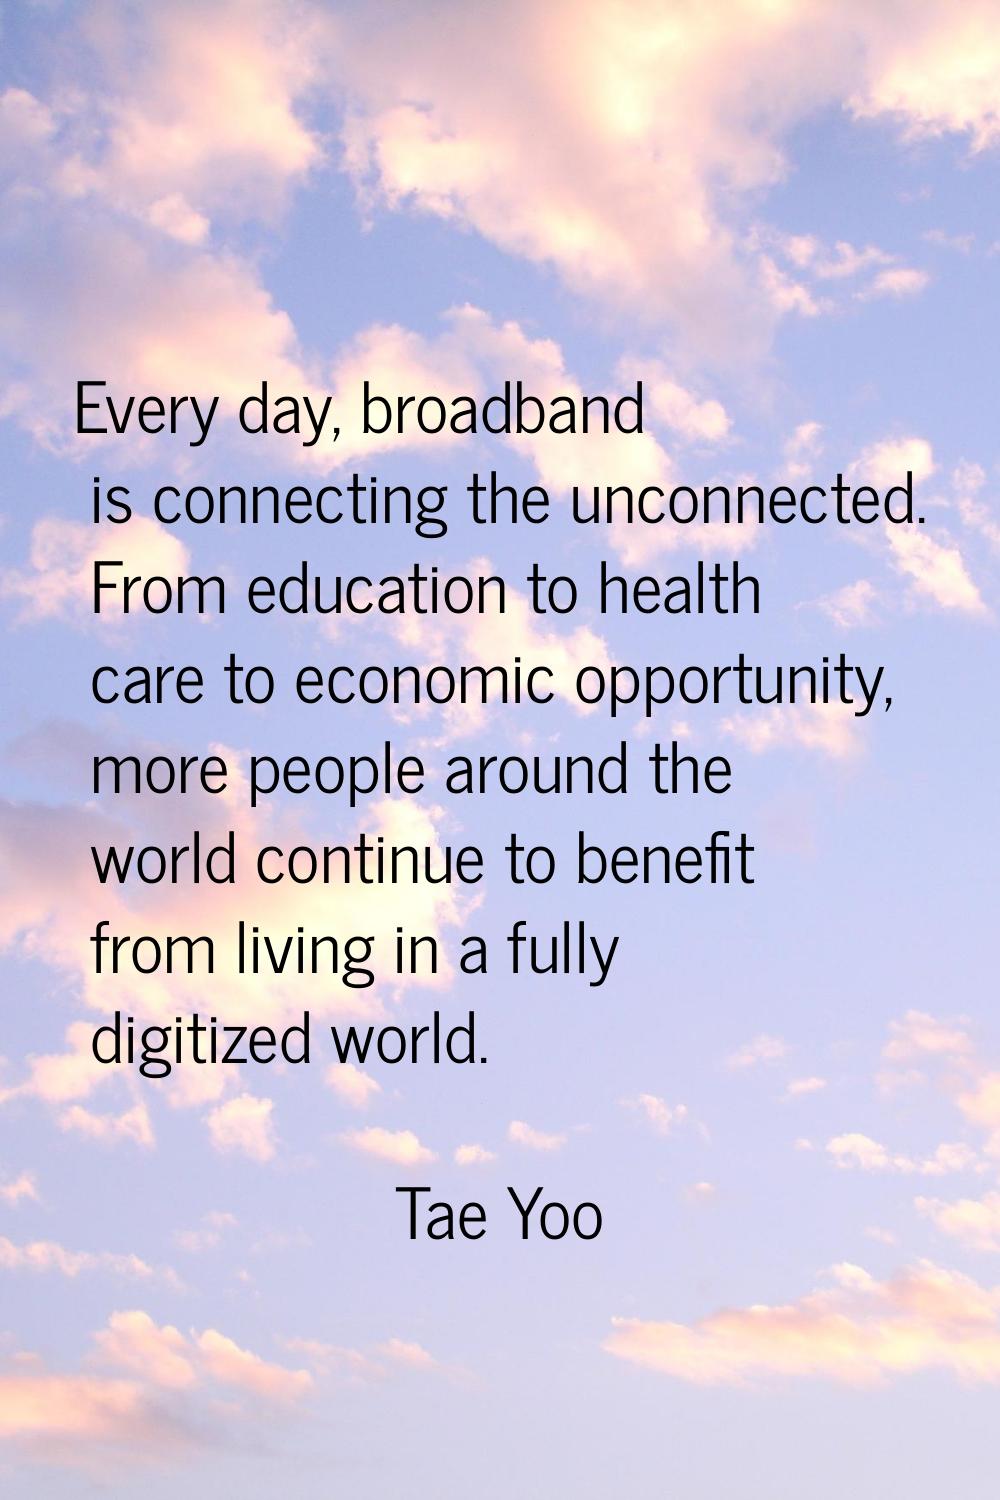 Every day, broadband is connecting the unconnected. From education to health care to economic oppor